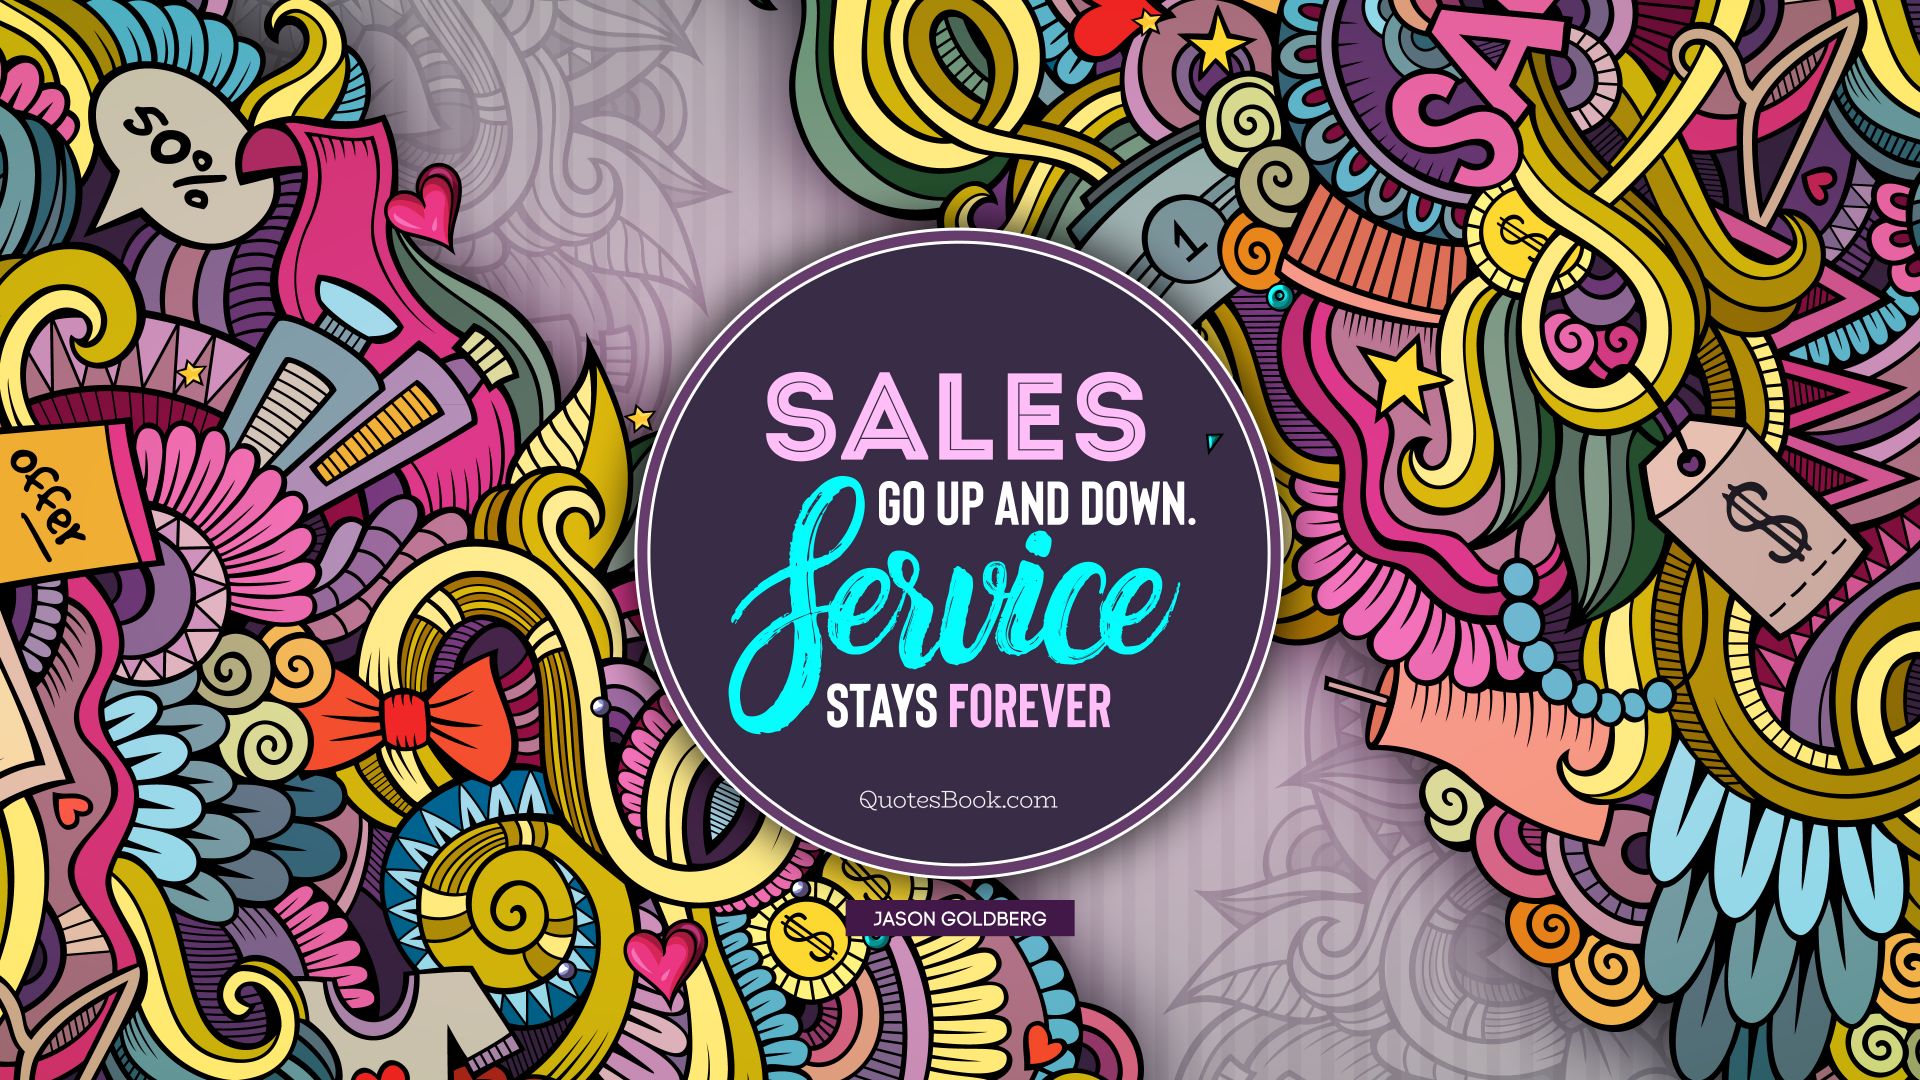 Sales go up and down. Service stays forever. - Quote by Jason Goldberg